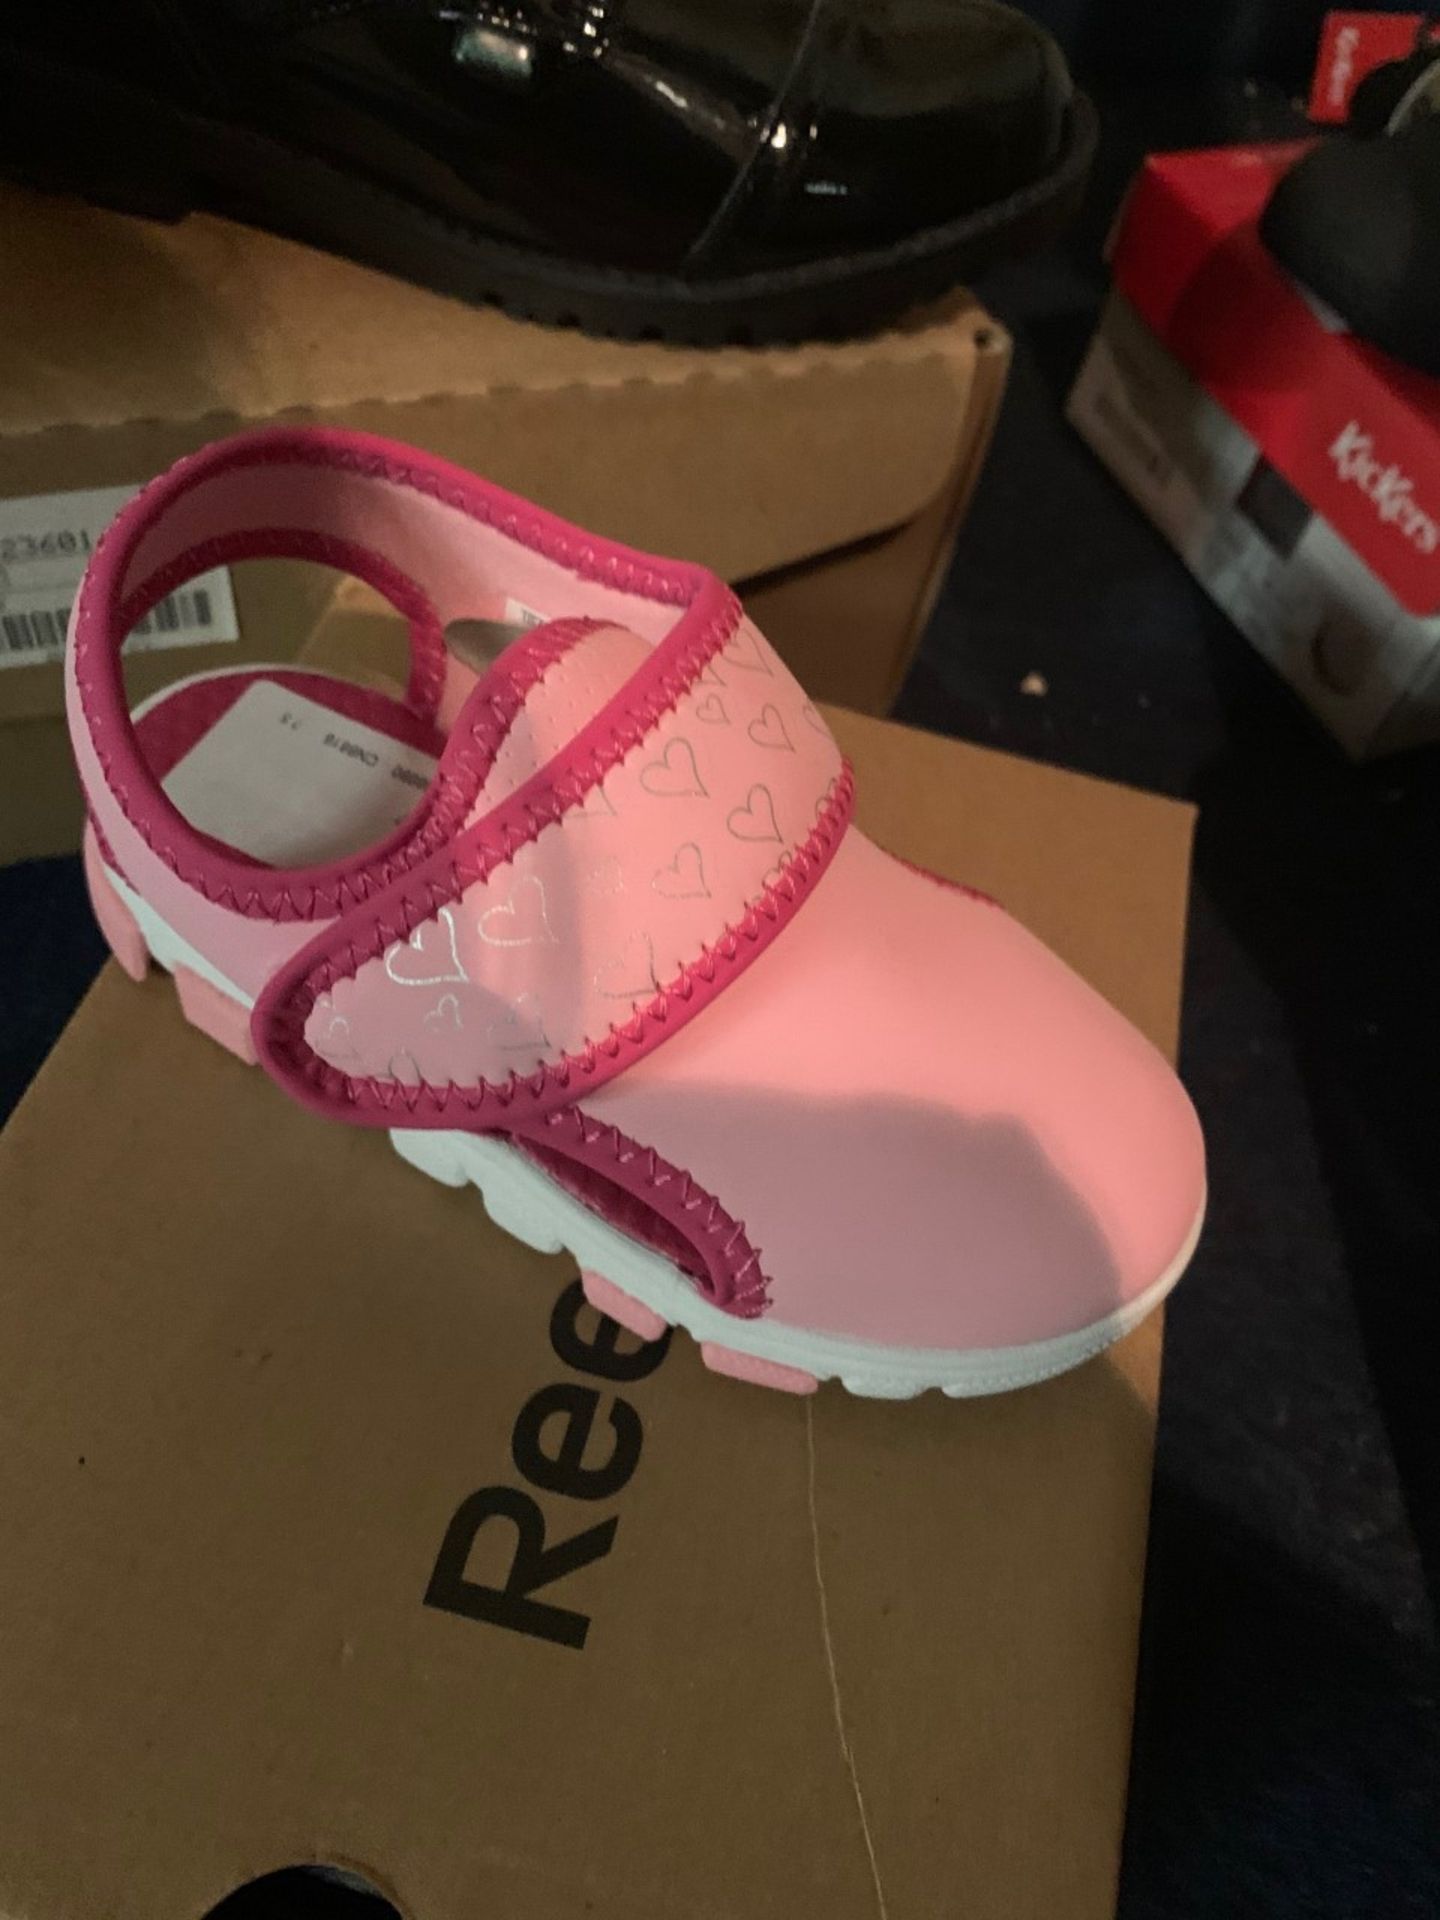 NEW & BOXED REEBOK WAVE GLIDERS PINK SIZE INFANT 7.5 (198/21)